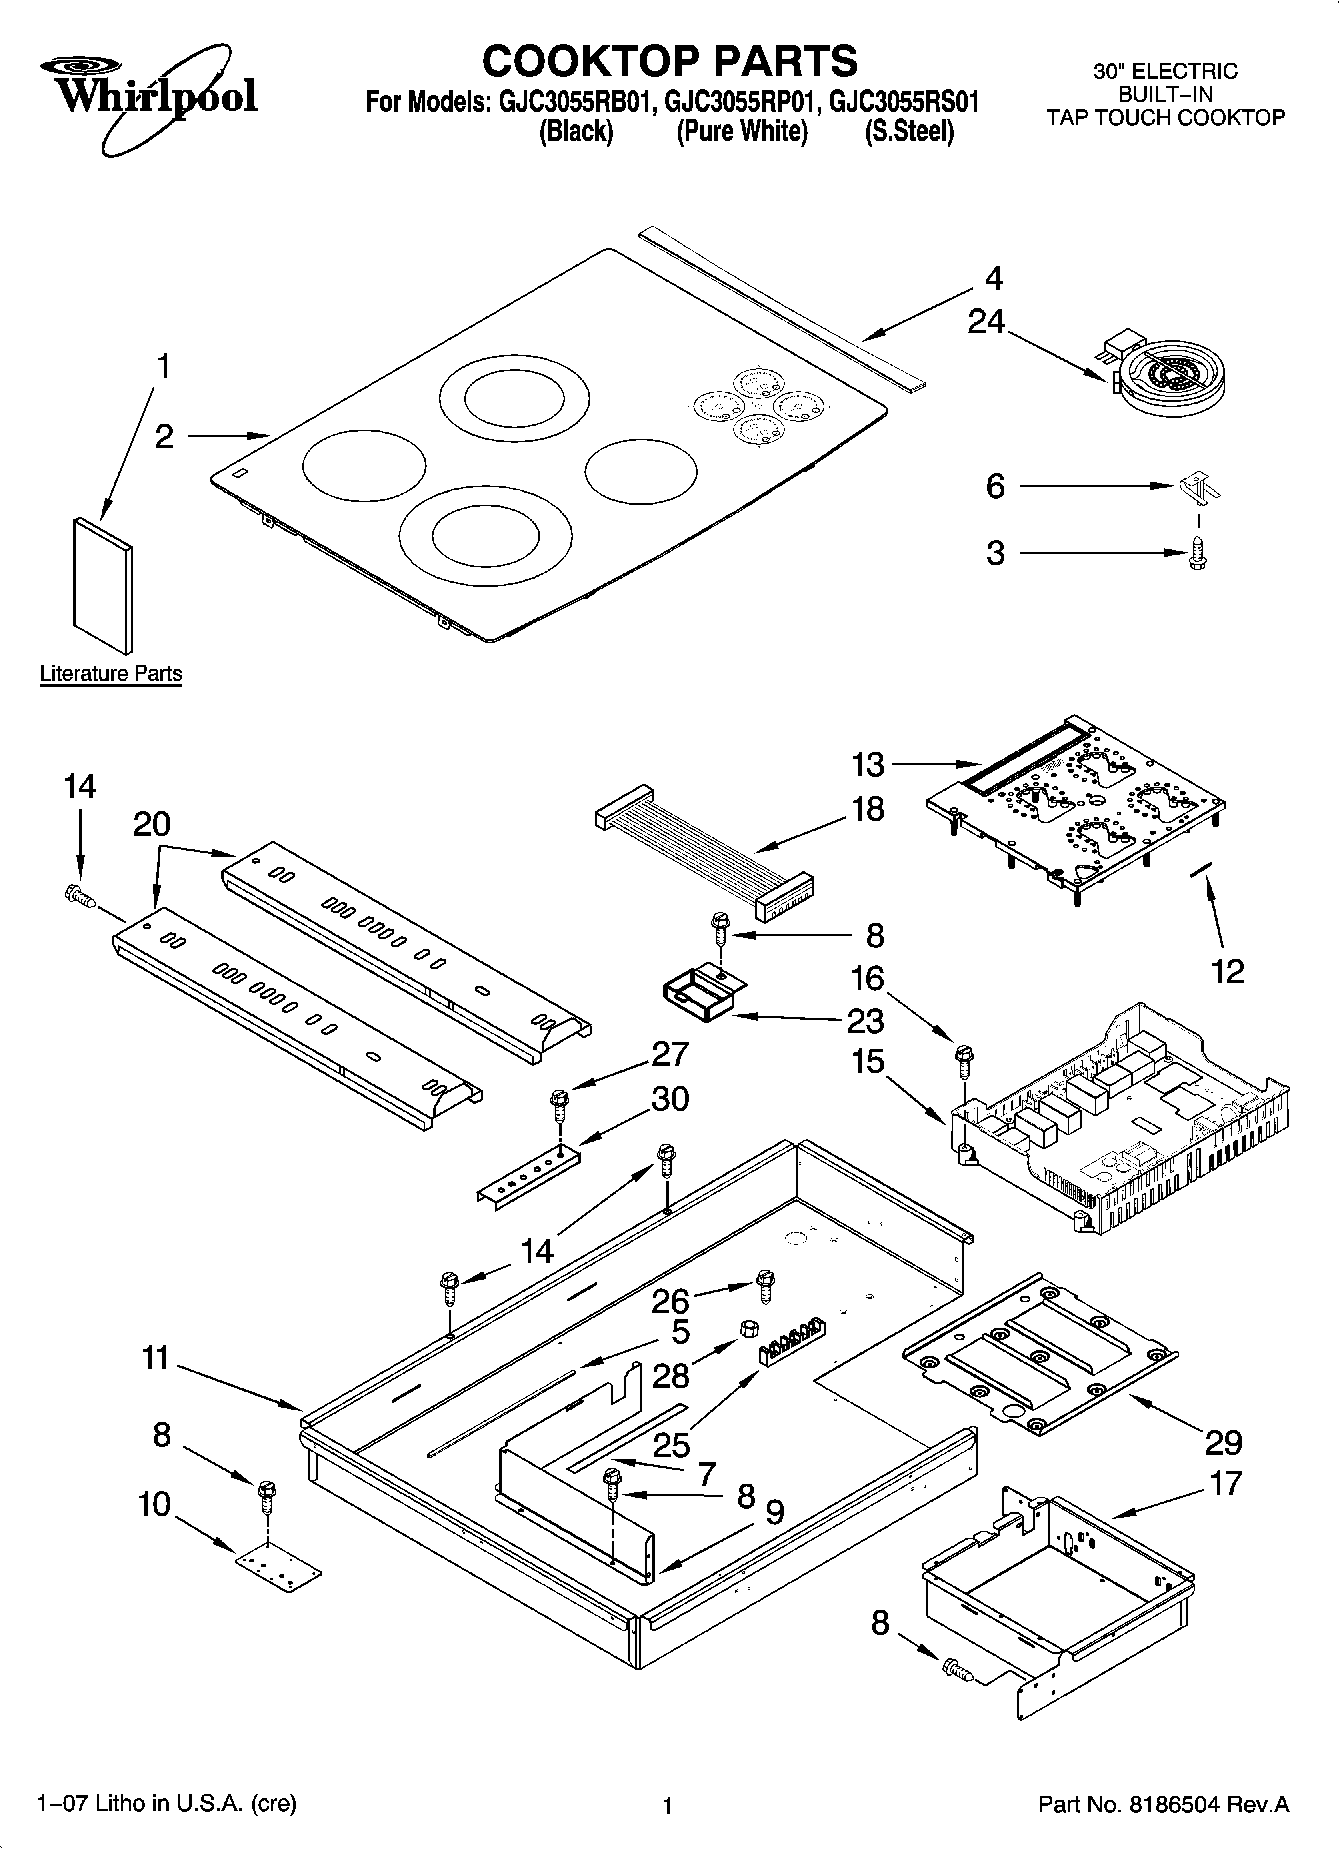 01 - COOKTOP PARTS, OPTIONAL PARTS (NOT INCLUDED)